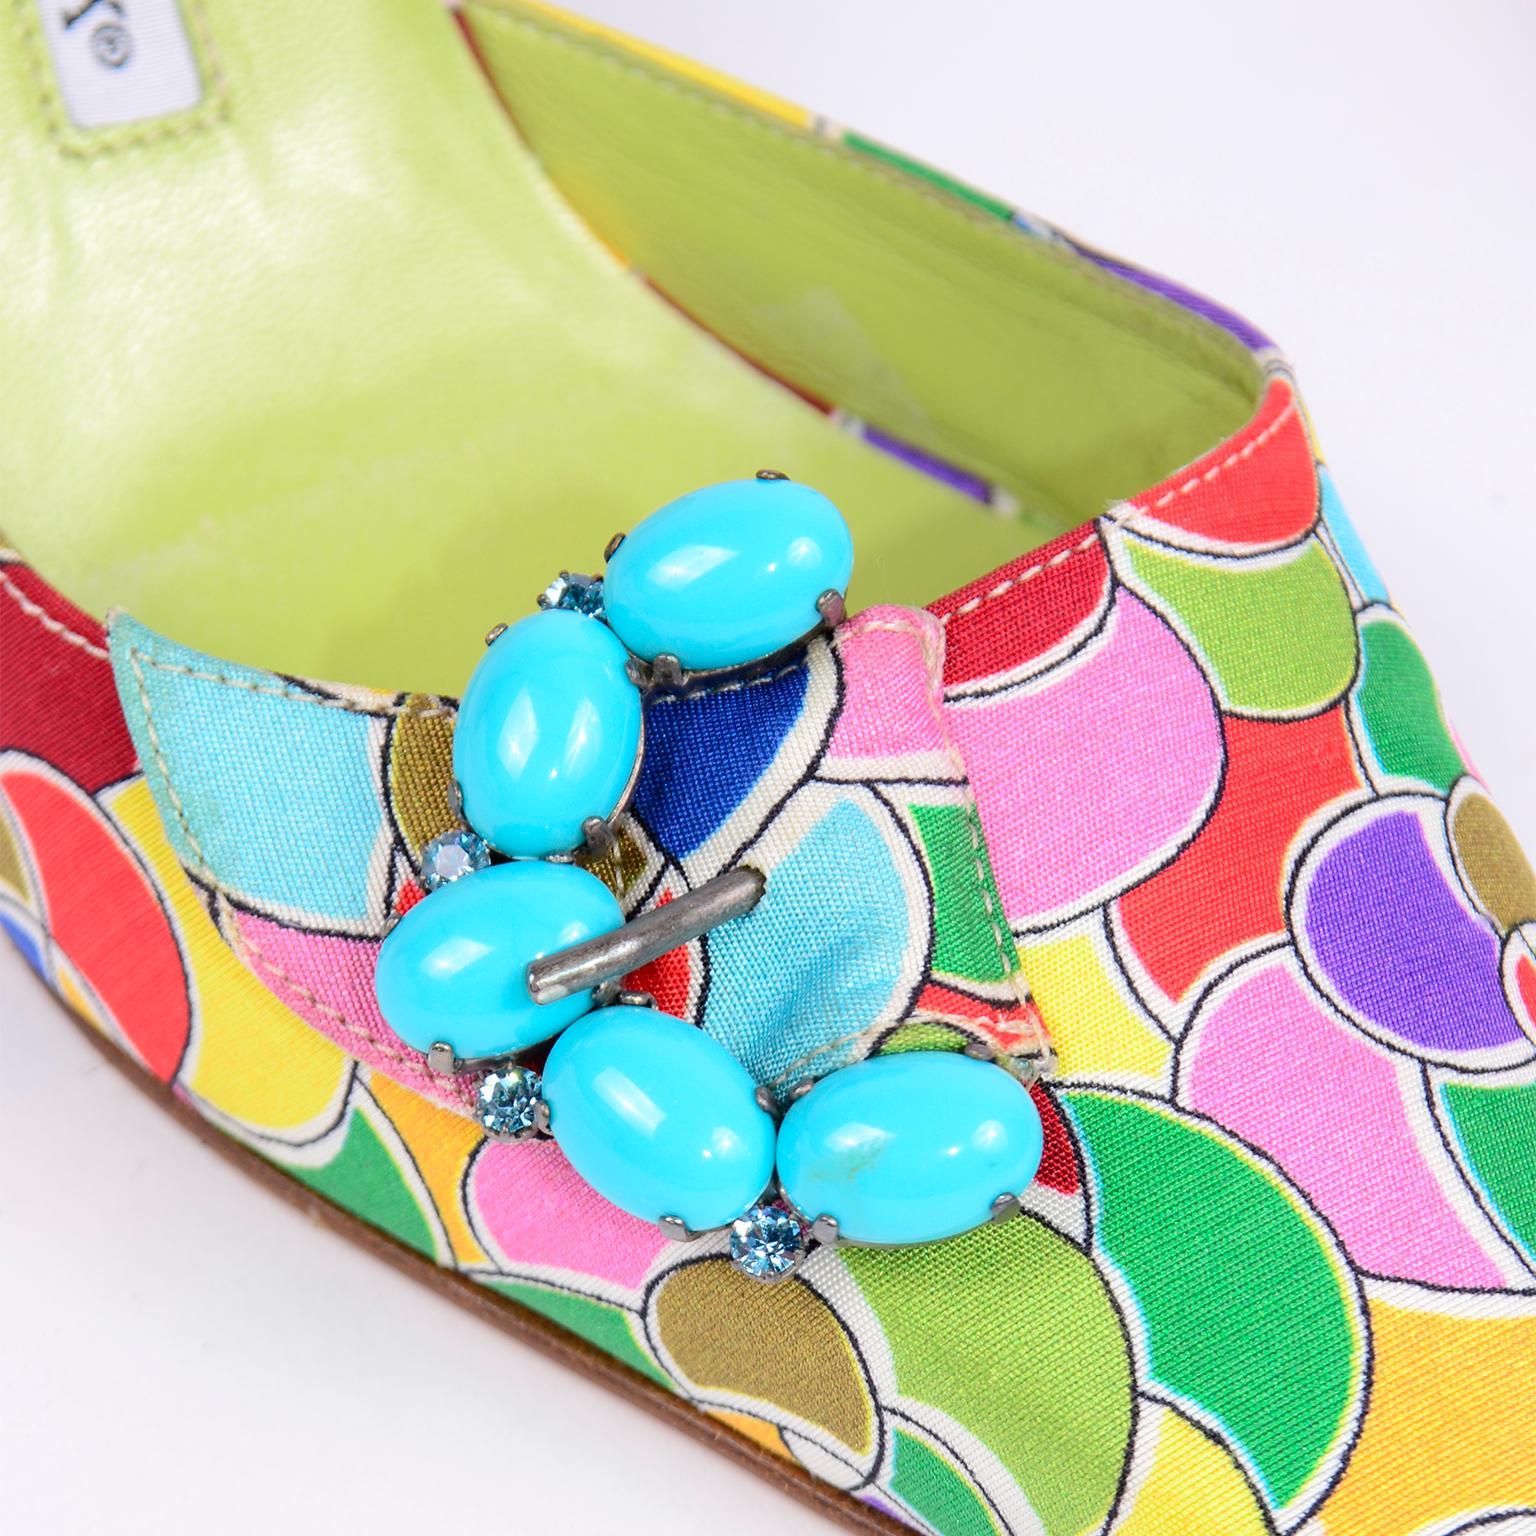 Manolo Blahnik Atomica Colorful Heeled Mules w/ Turquoise Buckle Size 36 1/2 For Sale 1